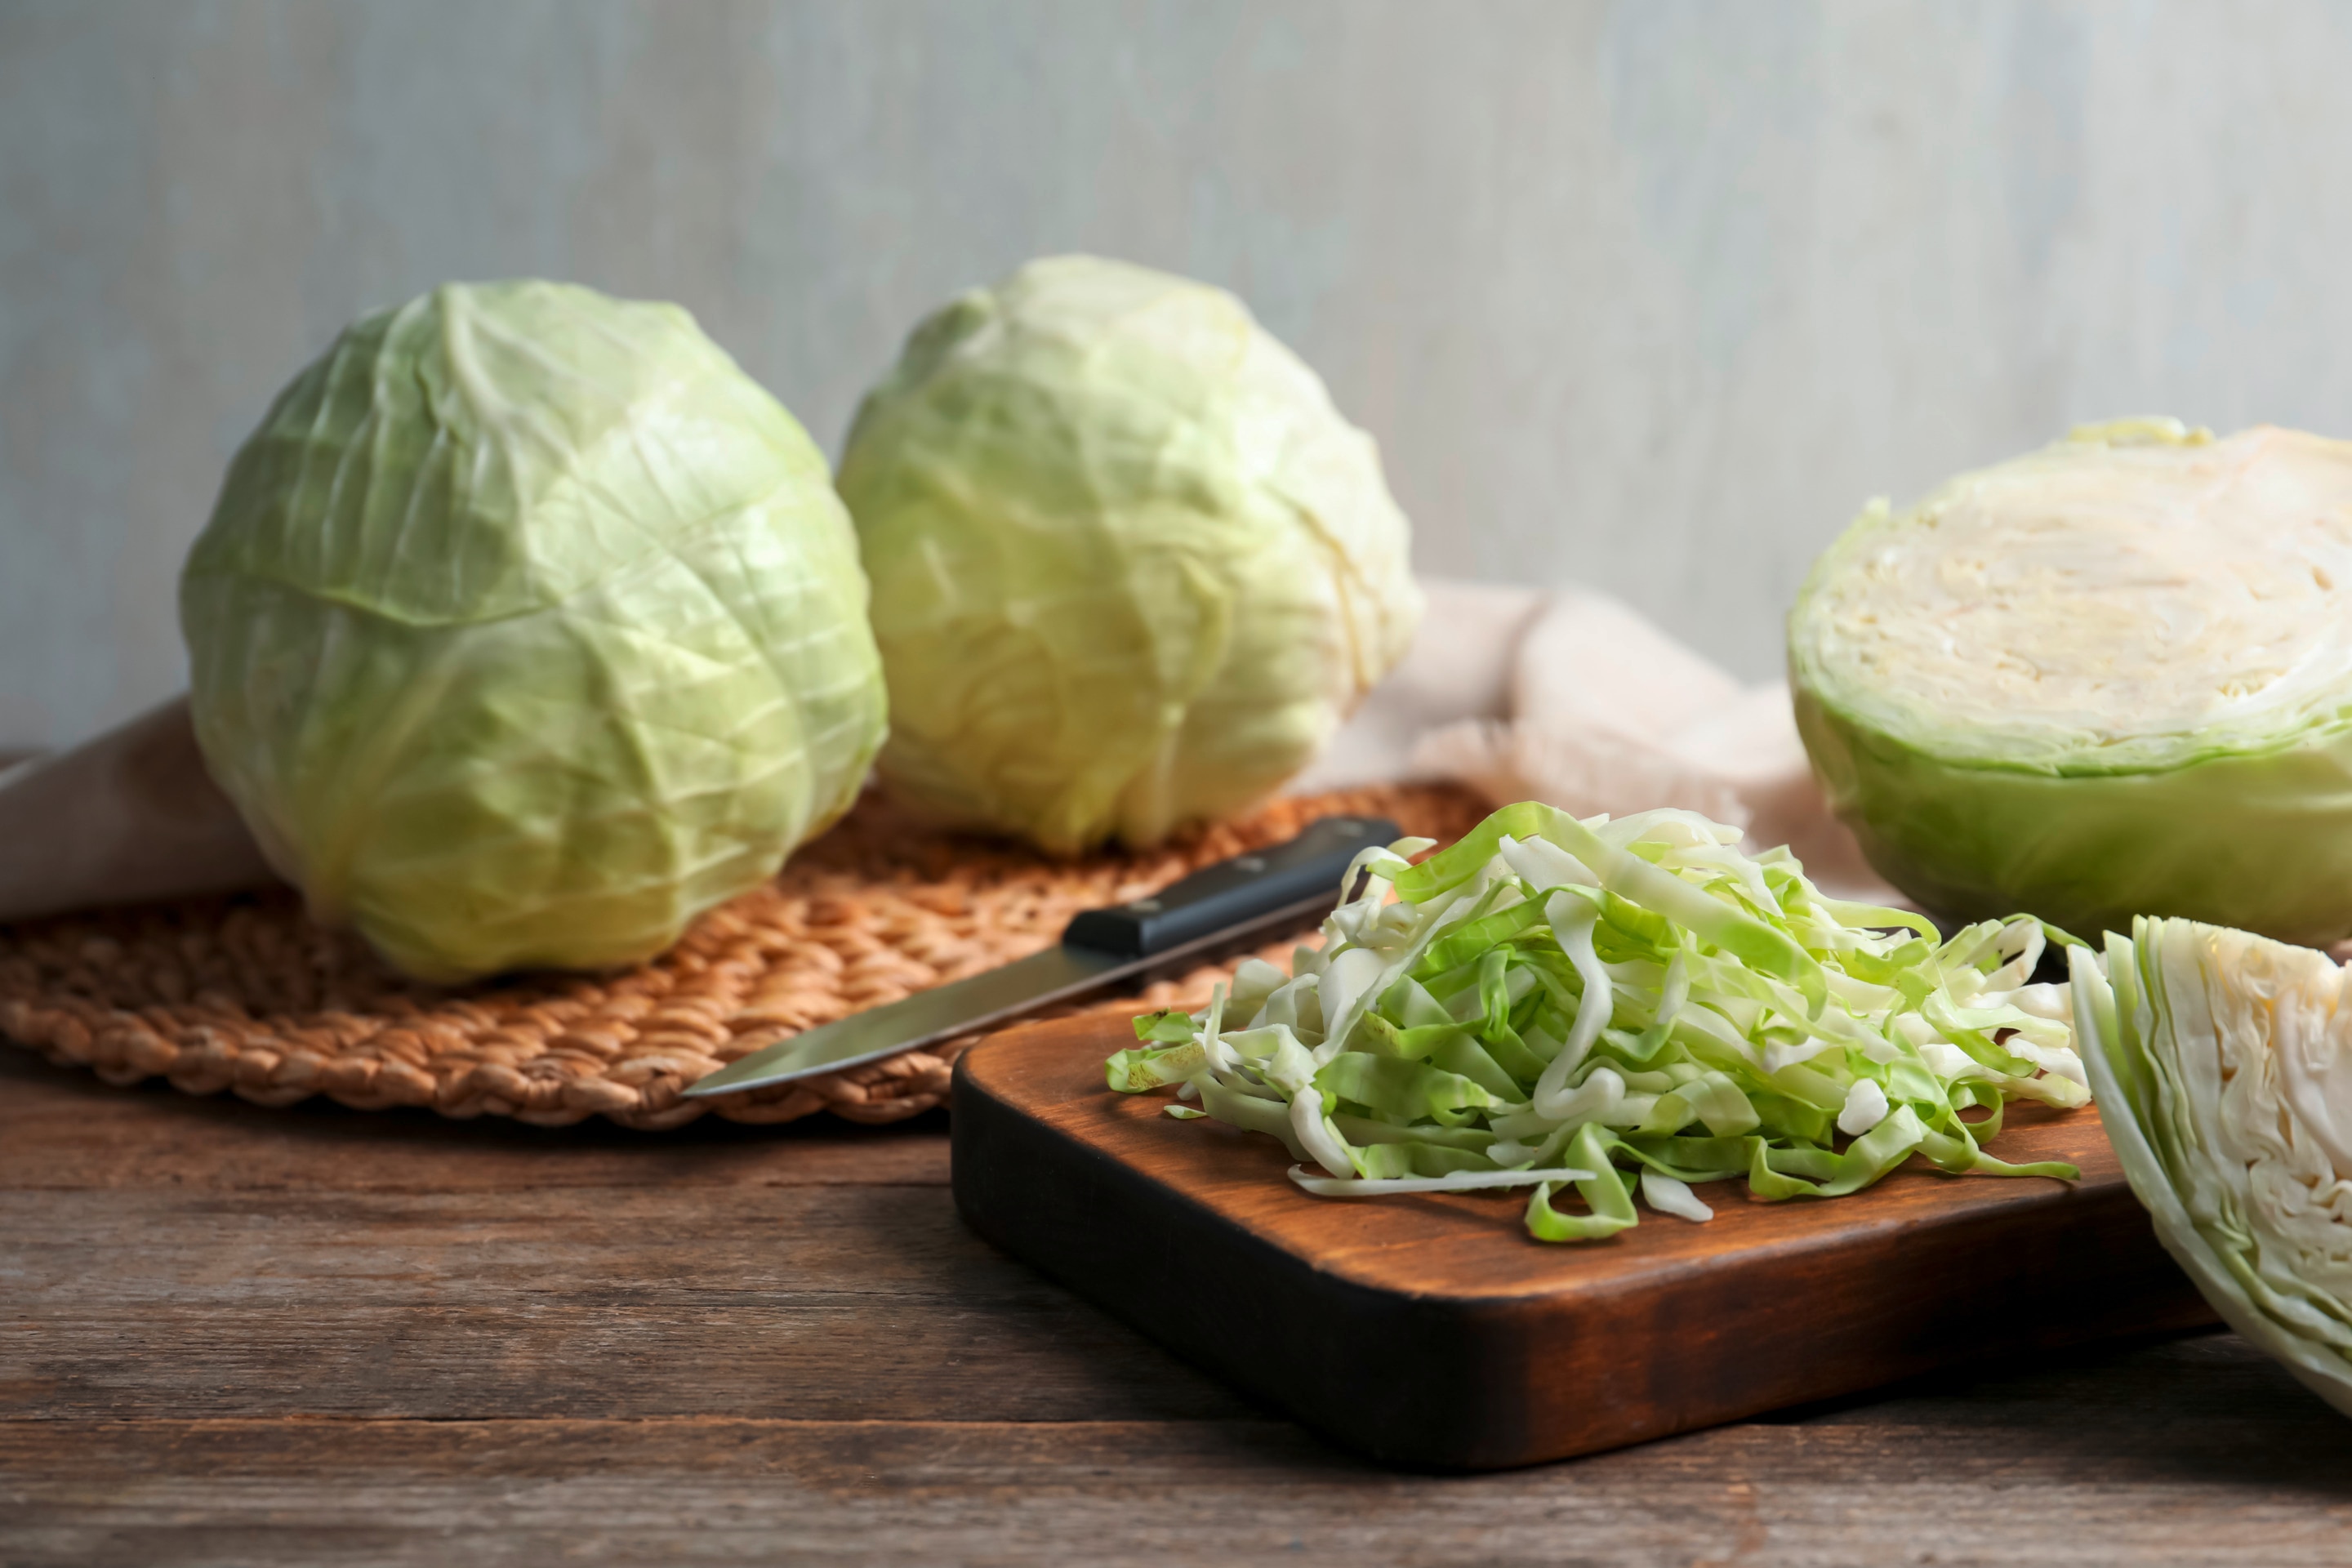 Two whole cabbages along with half a head and some shredded on a chopping board